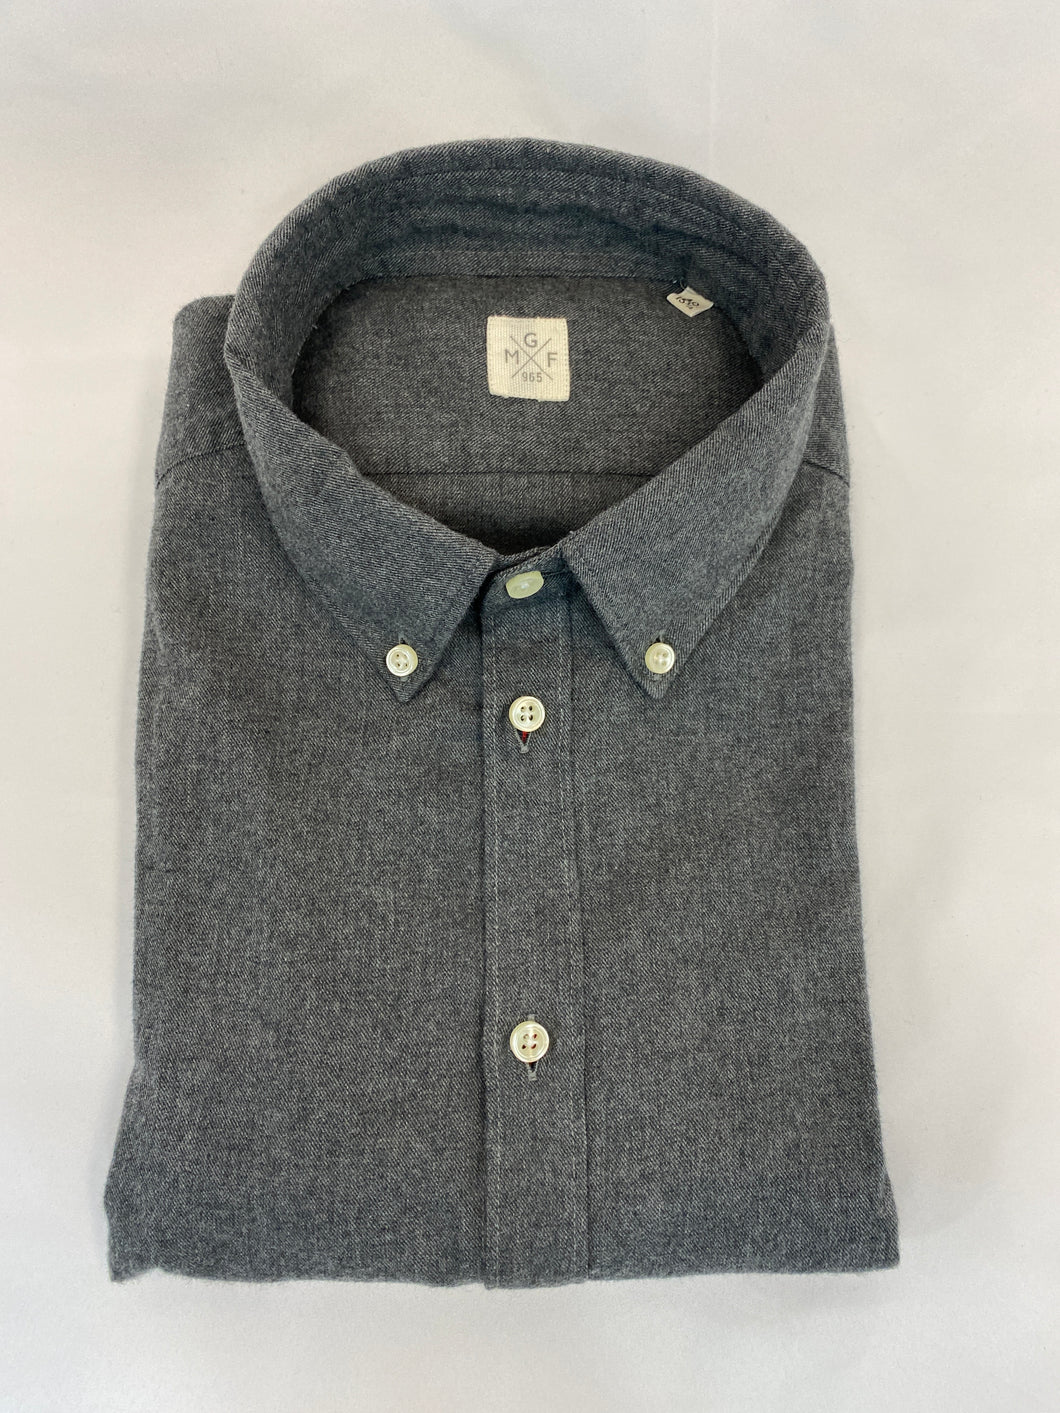 GMF 965 Solid Cotton Flannel Shirt Grey